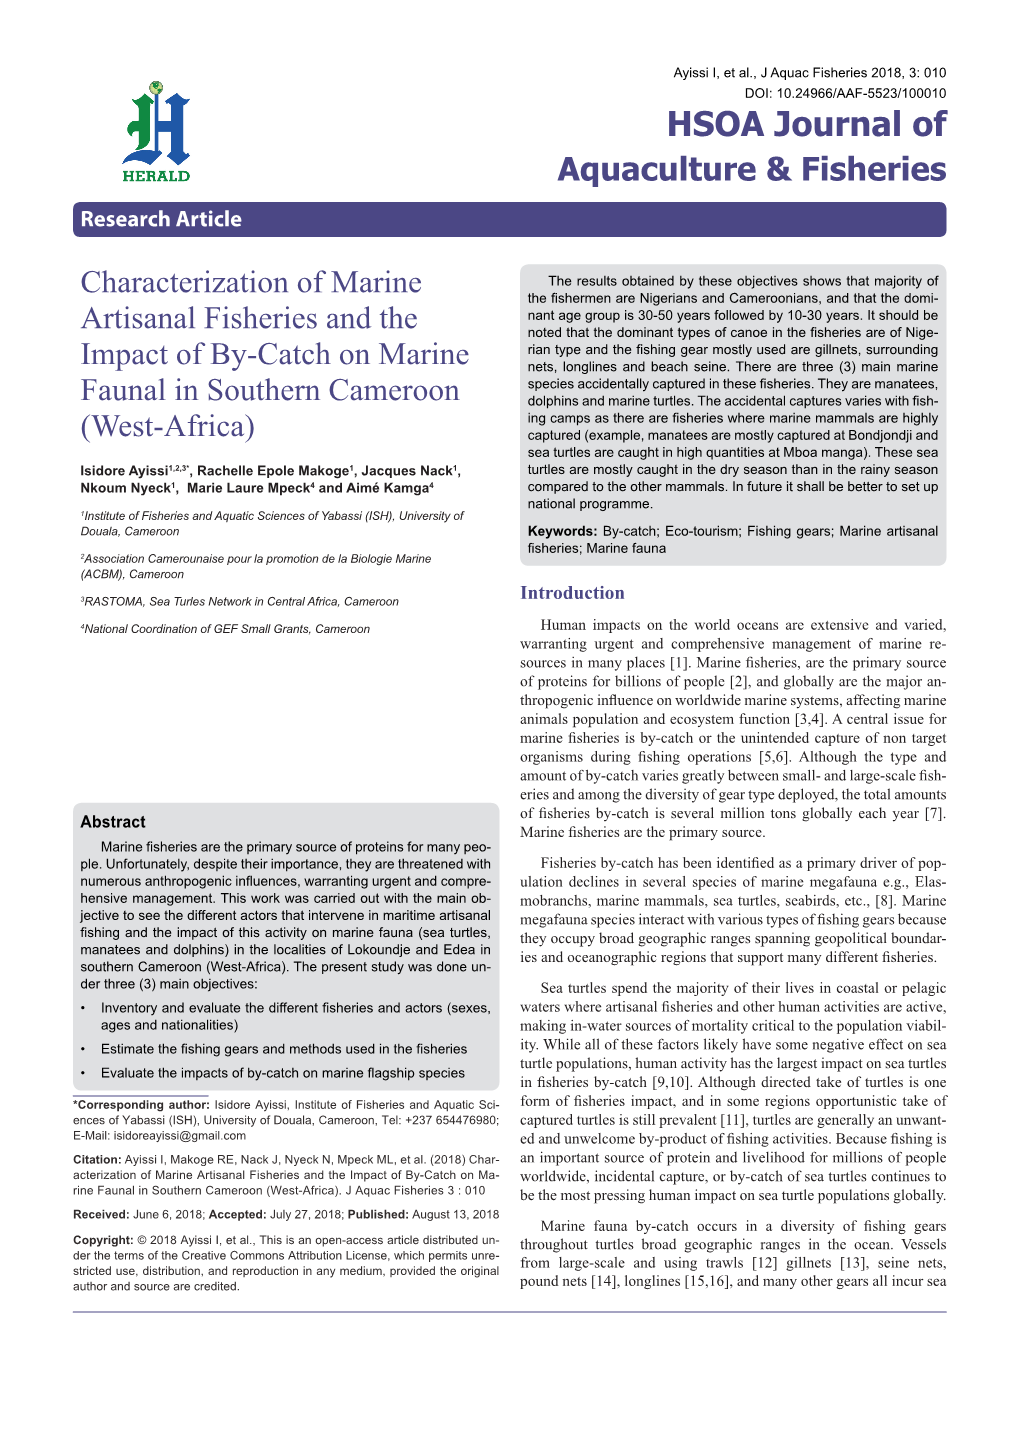 Characterization of Marine Artisanal Fisheries and the Impact of By-Catch on Marine Faunal in Southern Cameroon (West-Africa)